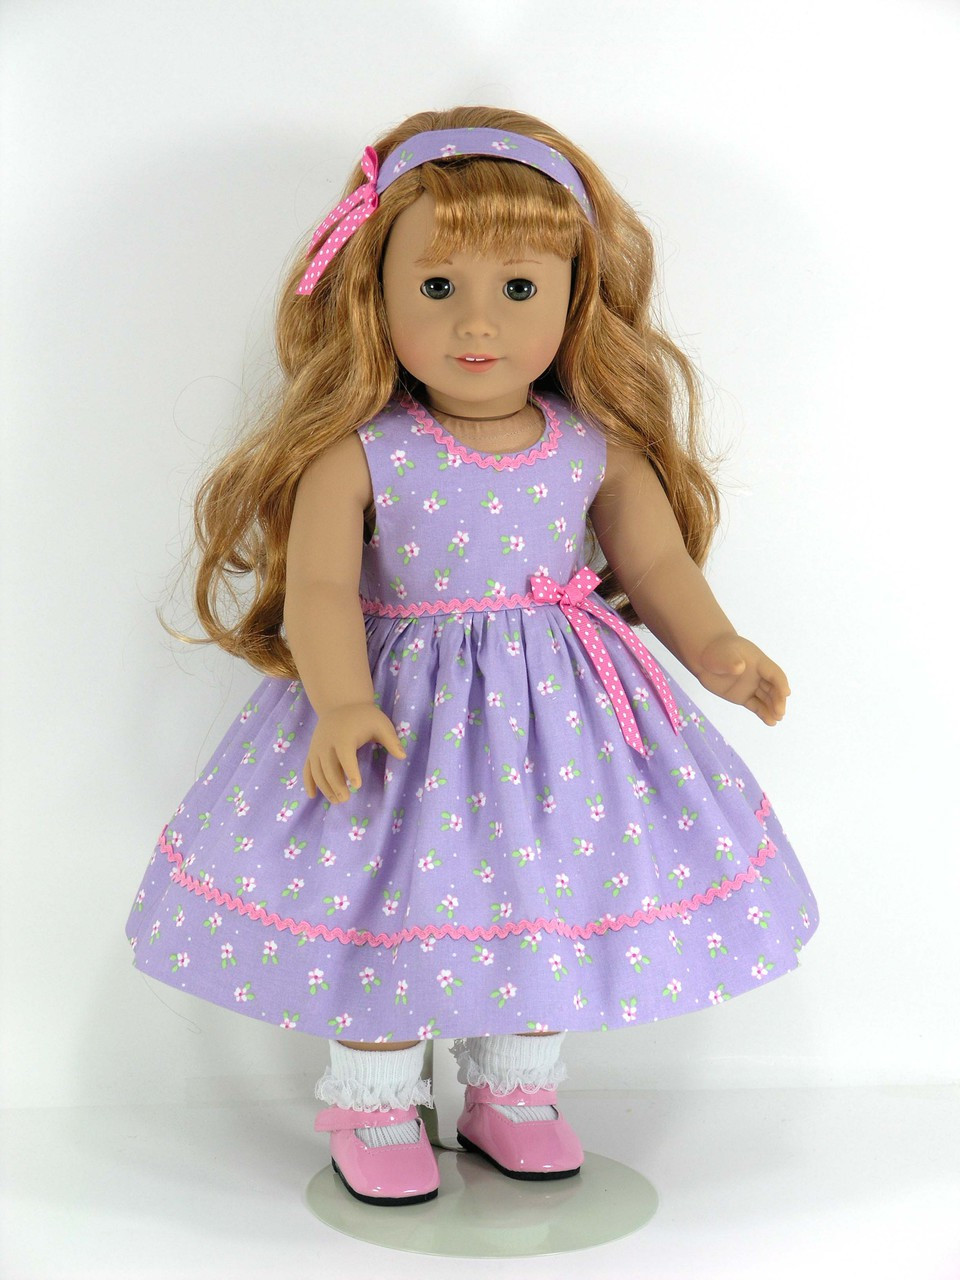 Handmade 18 inch Doll Clothes fit American Girl - Dress, Jacket ...